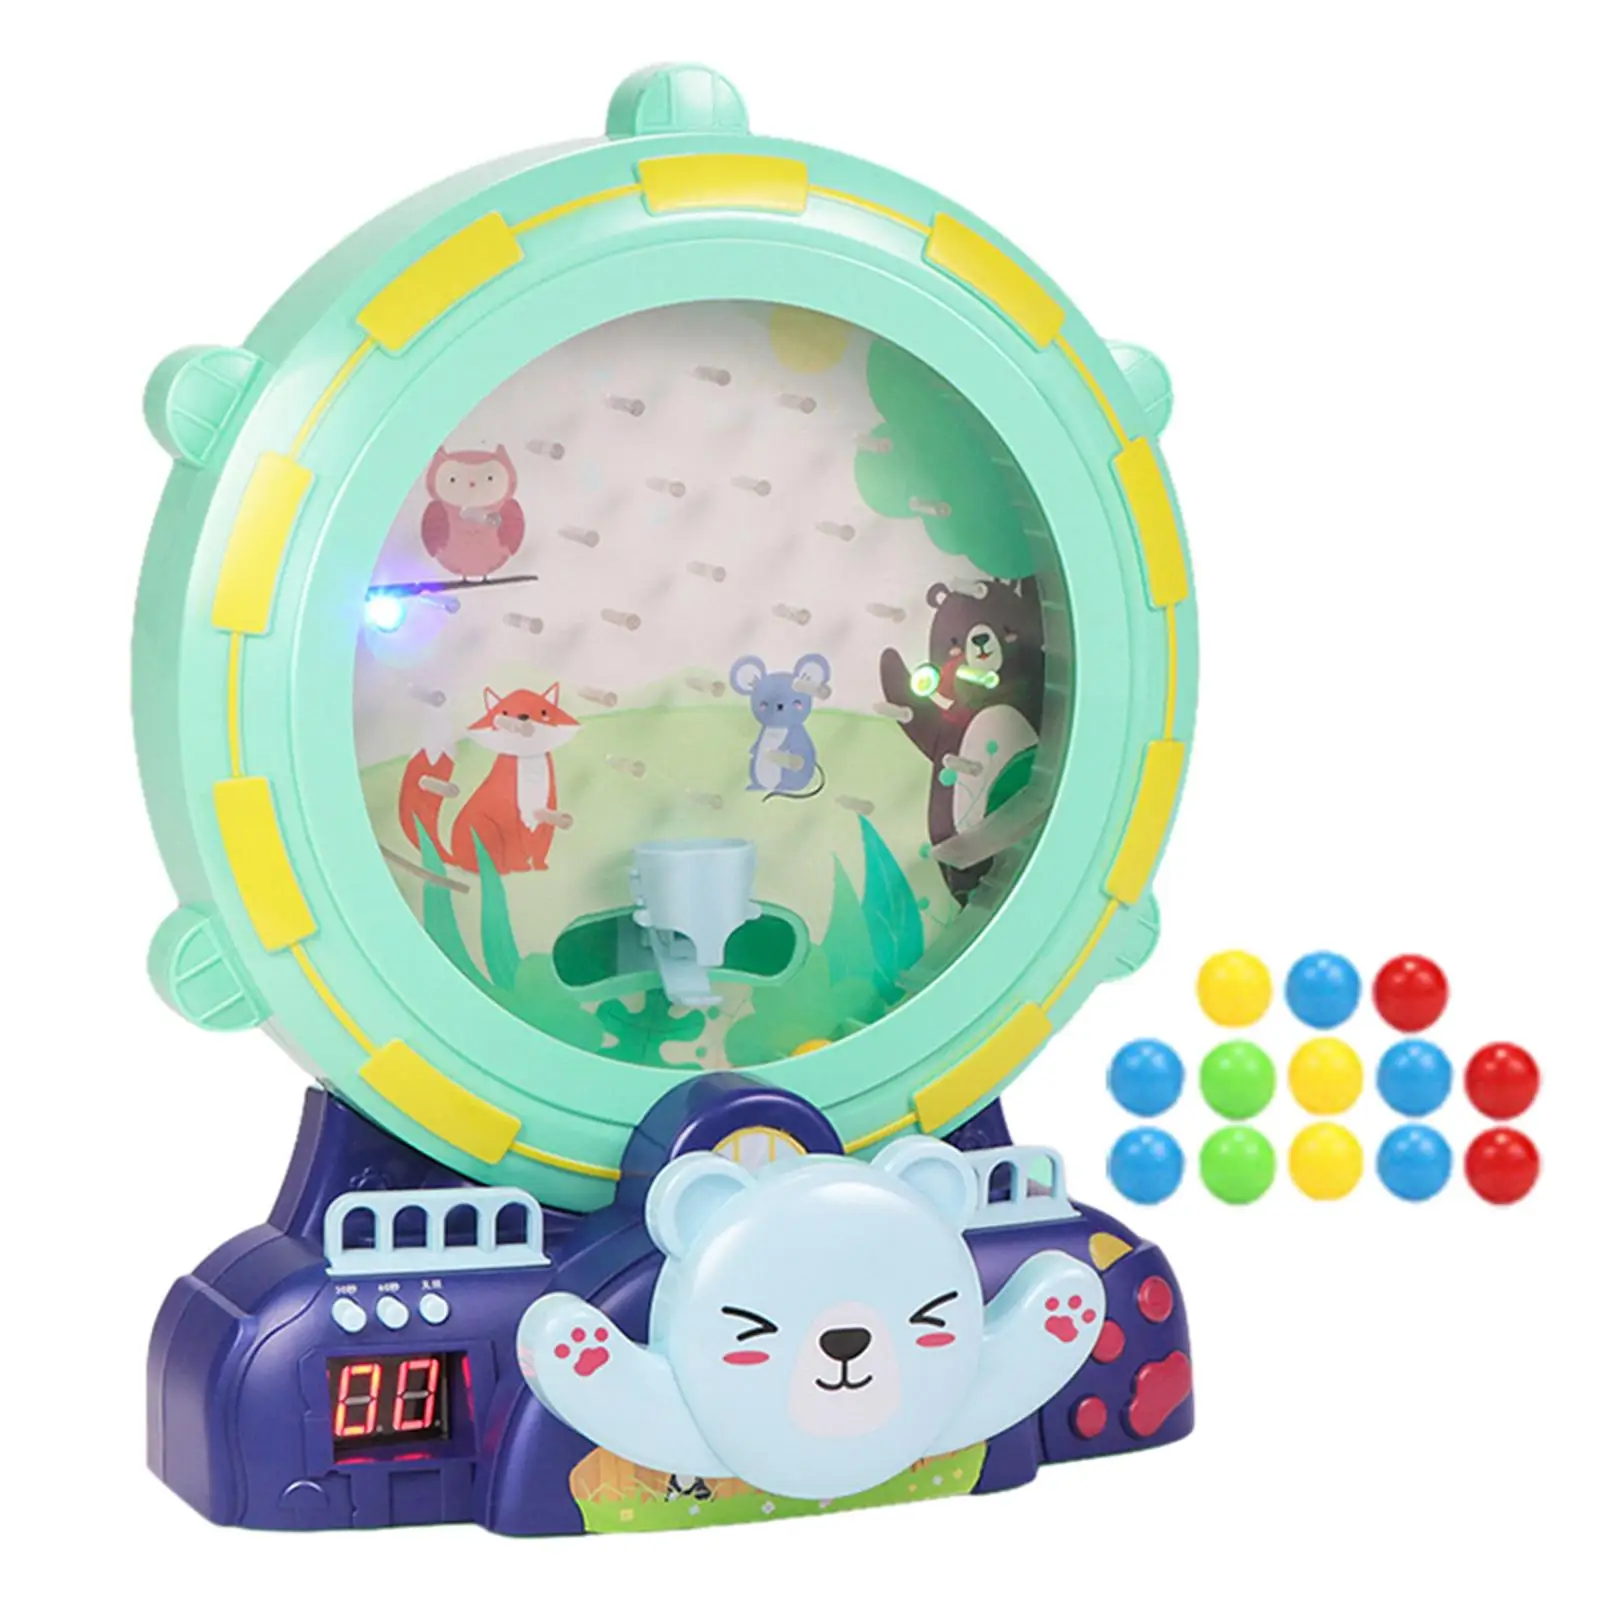 Kids Pick up Bean Machine Interactive Attention Educational Electronic Pinball Machine for Party Birthday Home Gift Preschool